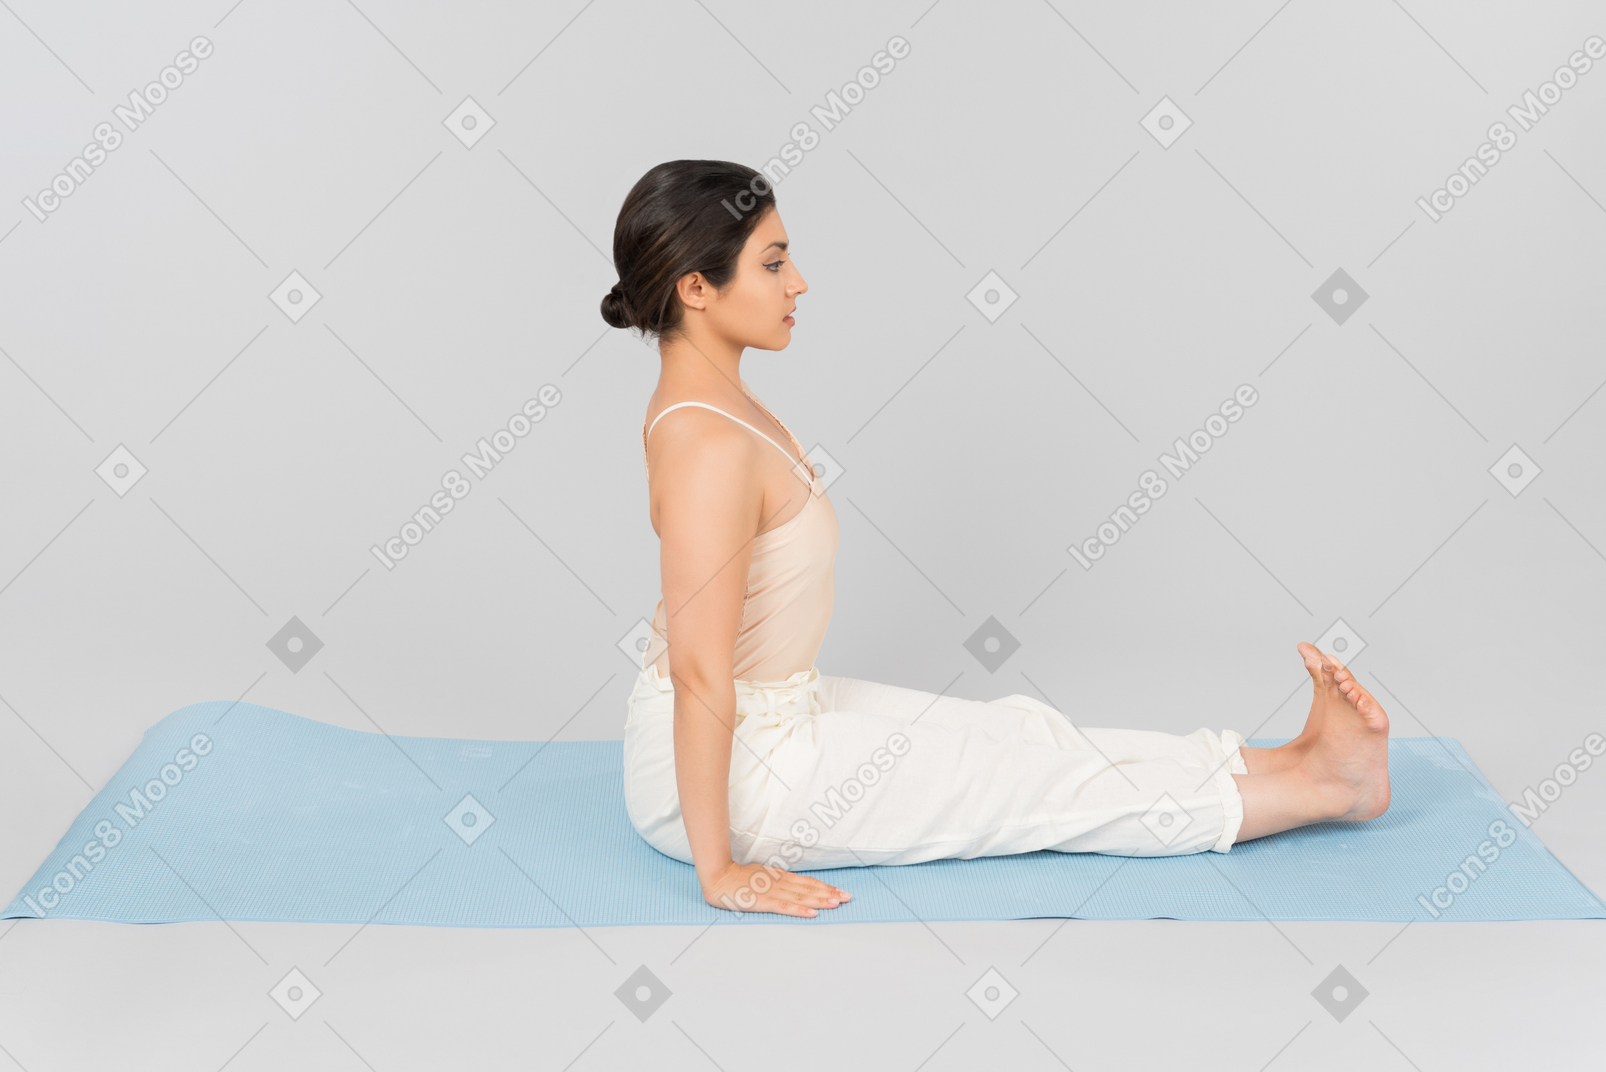 Young indian woman sitting with back straight on yoga mat